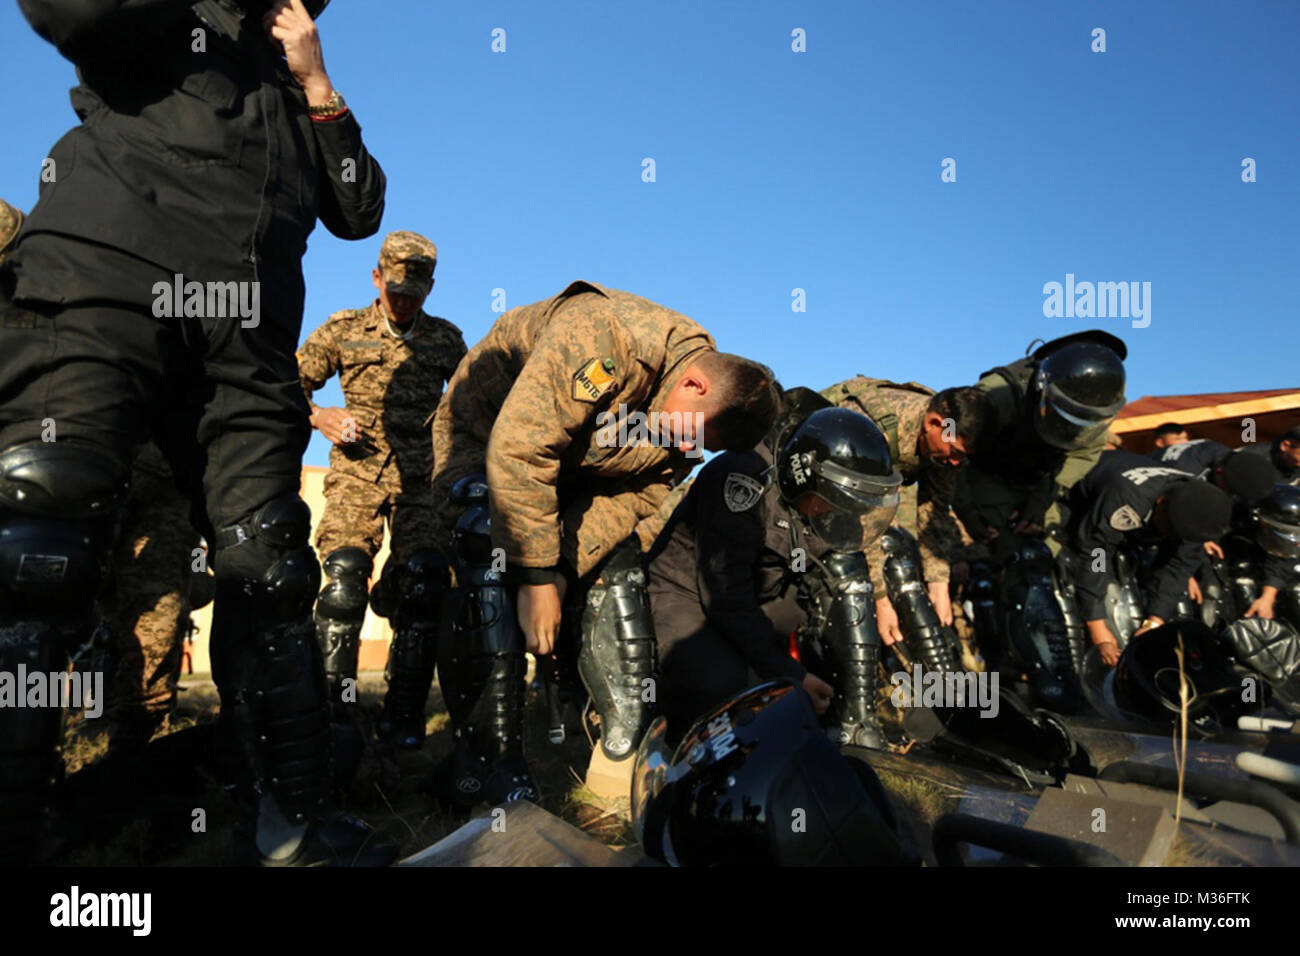 Mongolian police, soldiers train with U.S. Marines at Non-Lethal Executive Seminar in Mongolia by #PACOM Stock Photo